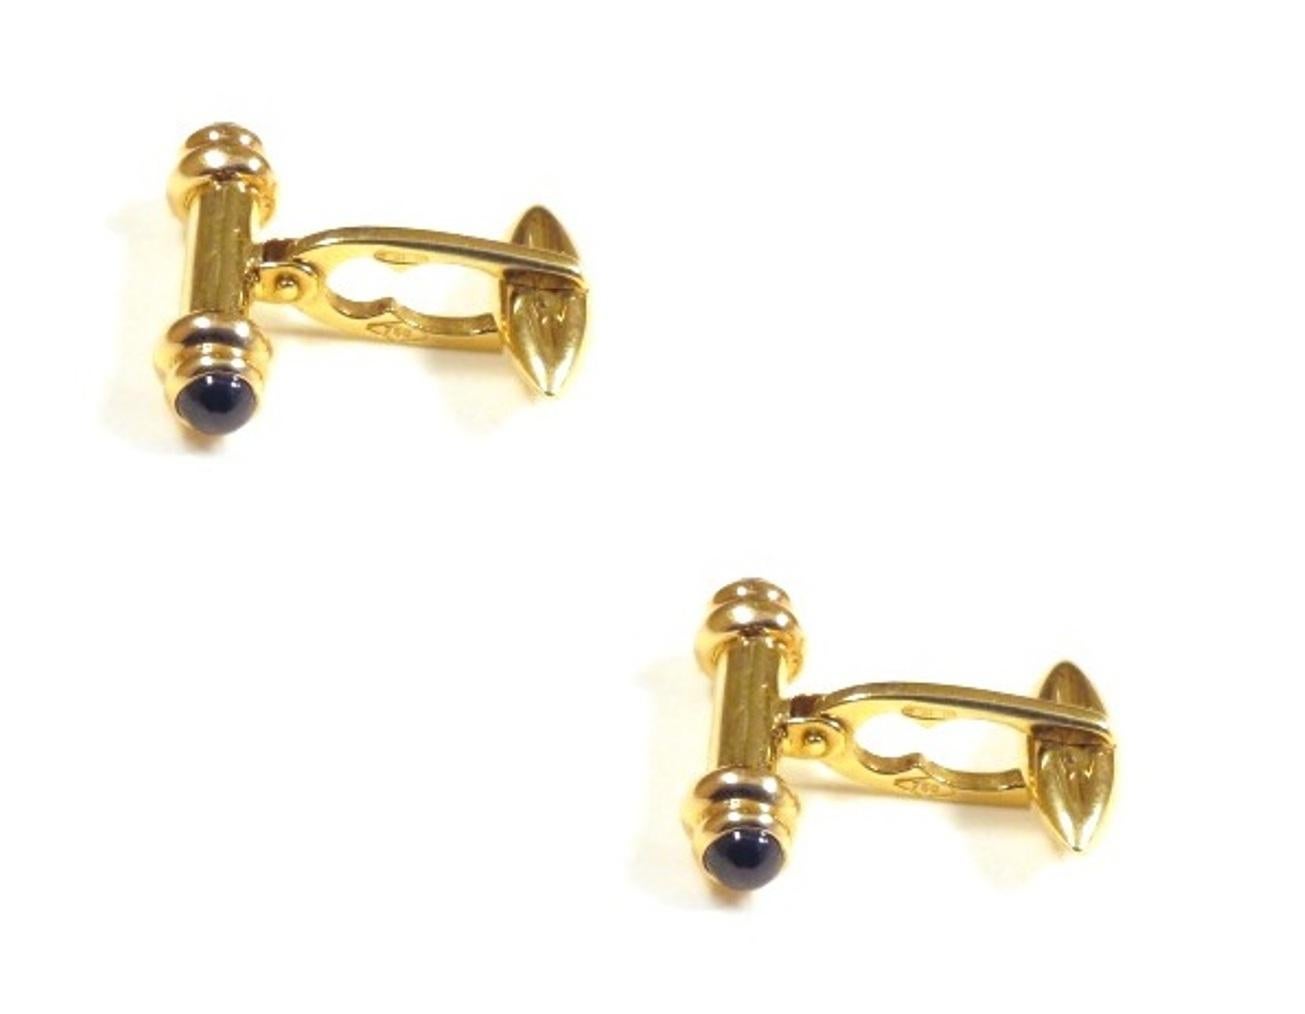 18 k yellow gold cufflinks with sapphires.
the size are 22 X 6 millimeters / 0,866142 X 0,23622 inches.
It  is stamped with the Italian Mark 750 - 716MI
Ready for delivery. It can be shipped with express delivery on